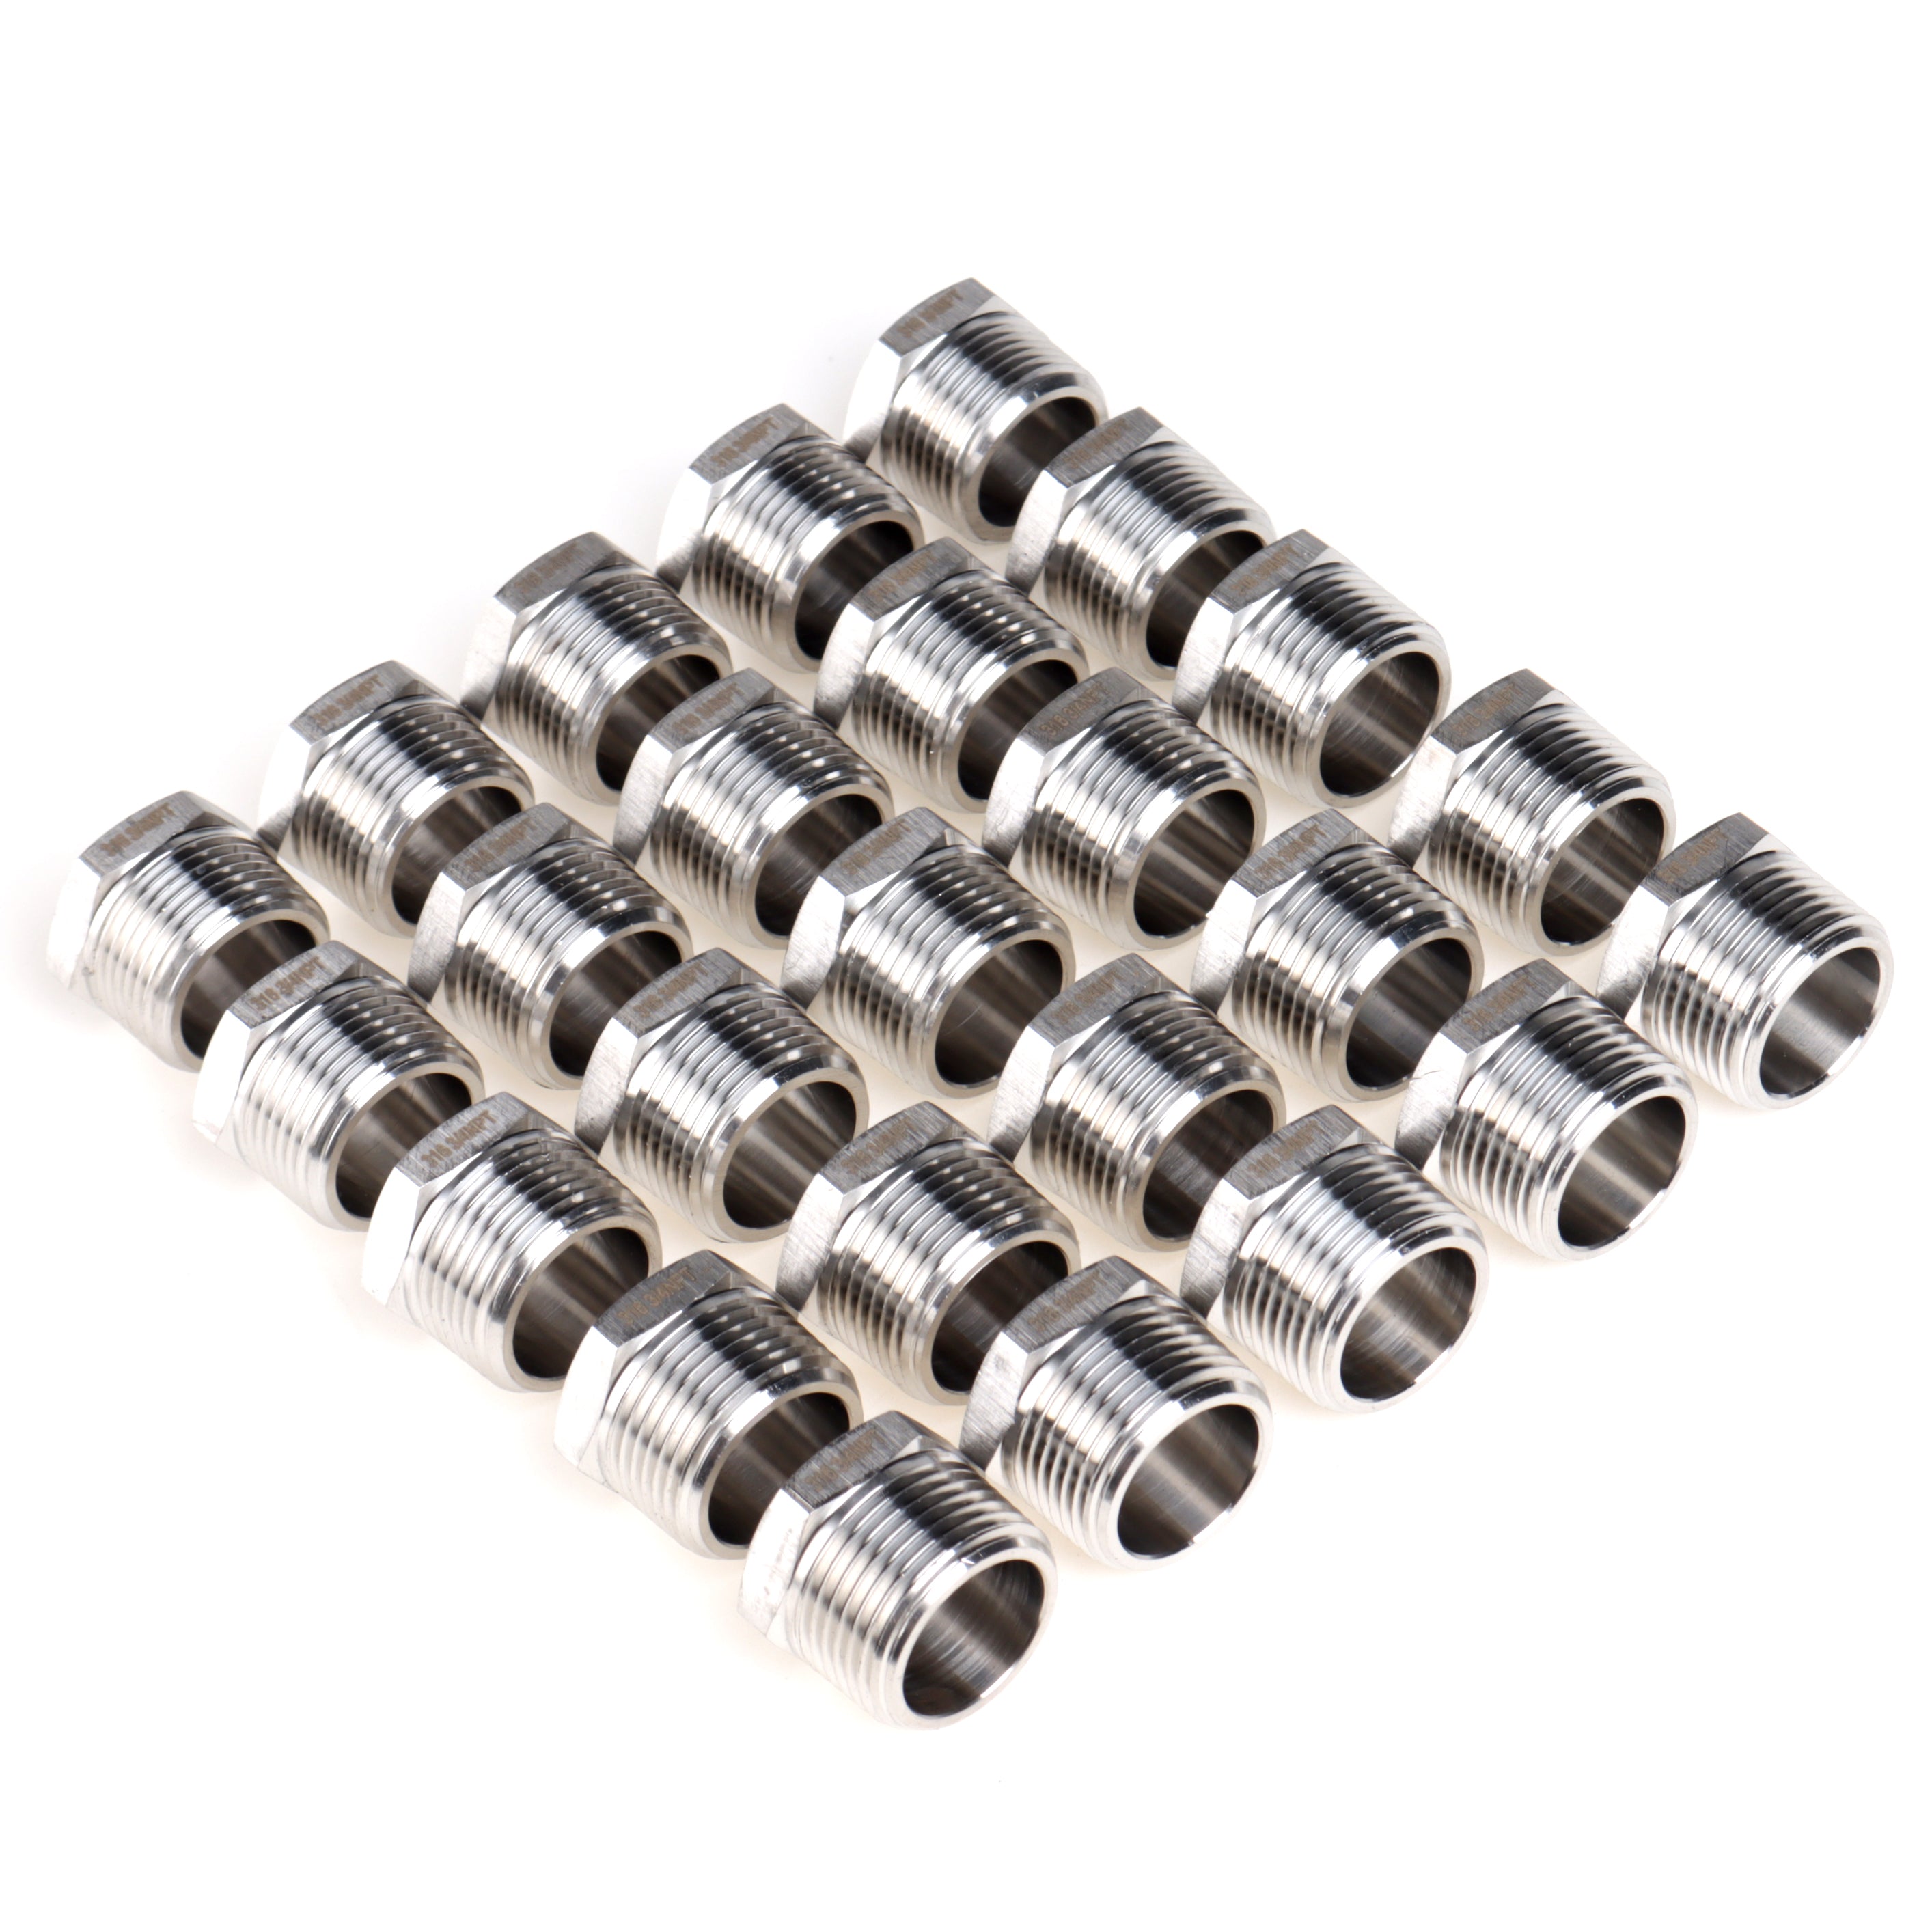 LTWFITTING Bar Production Stainless Steel 316 Pipe Hex Head Plug Fittings 3/4-Inch Male NPT Fuel Boat (Pack of 25)